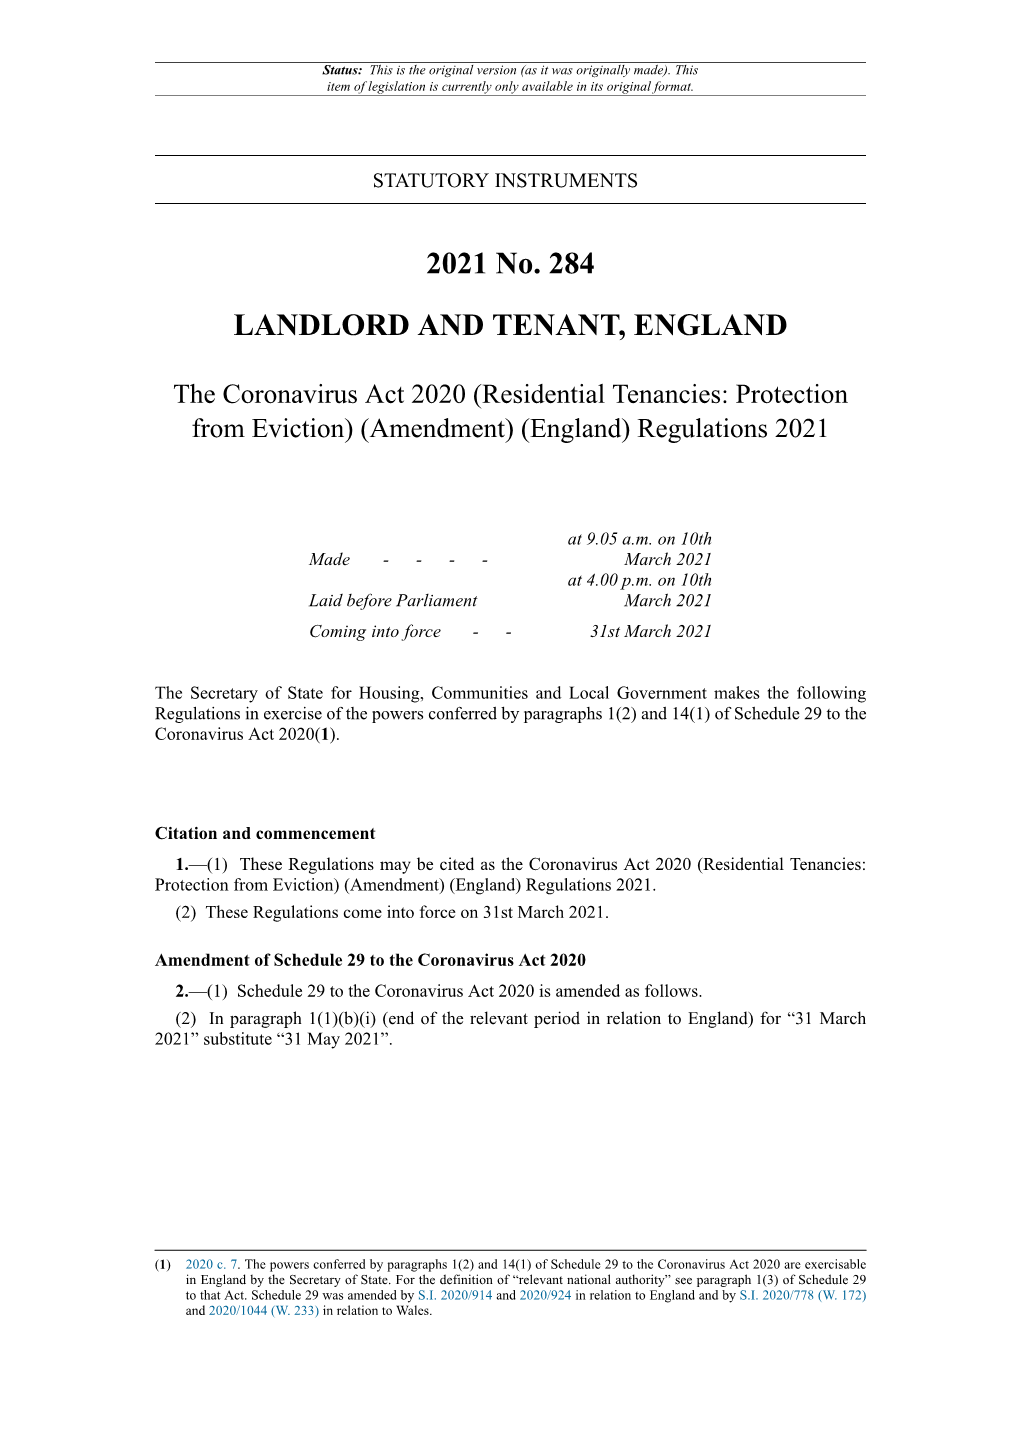 The Coronavirus Act 2020 (Residential Tenancies: Protection from Eviction) (Amendment) (England) Regulations 2021